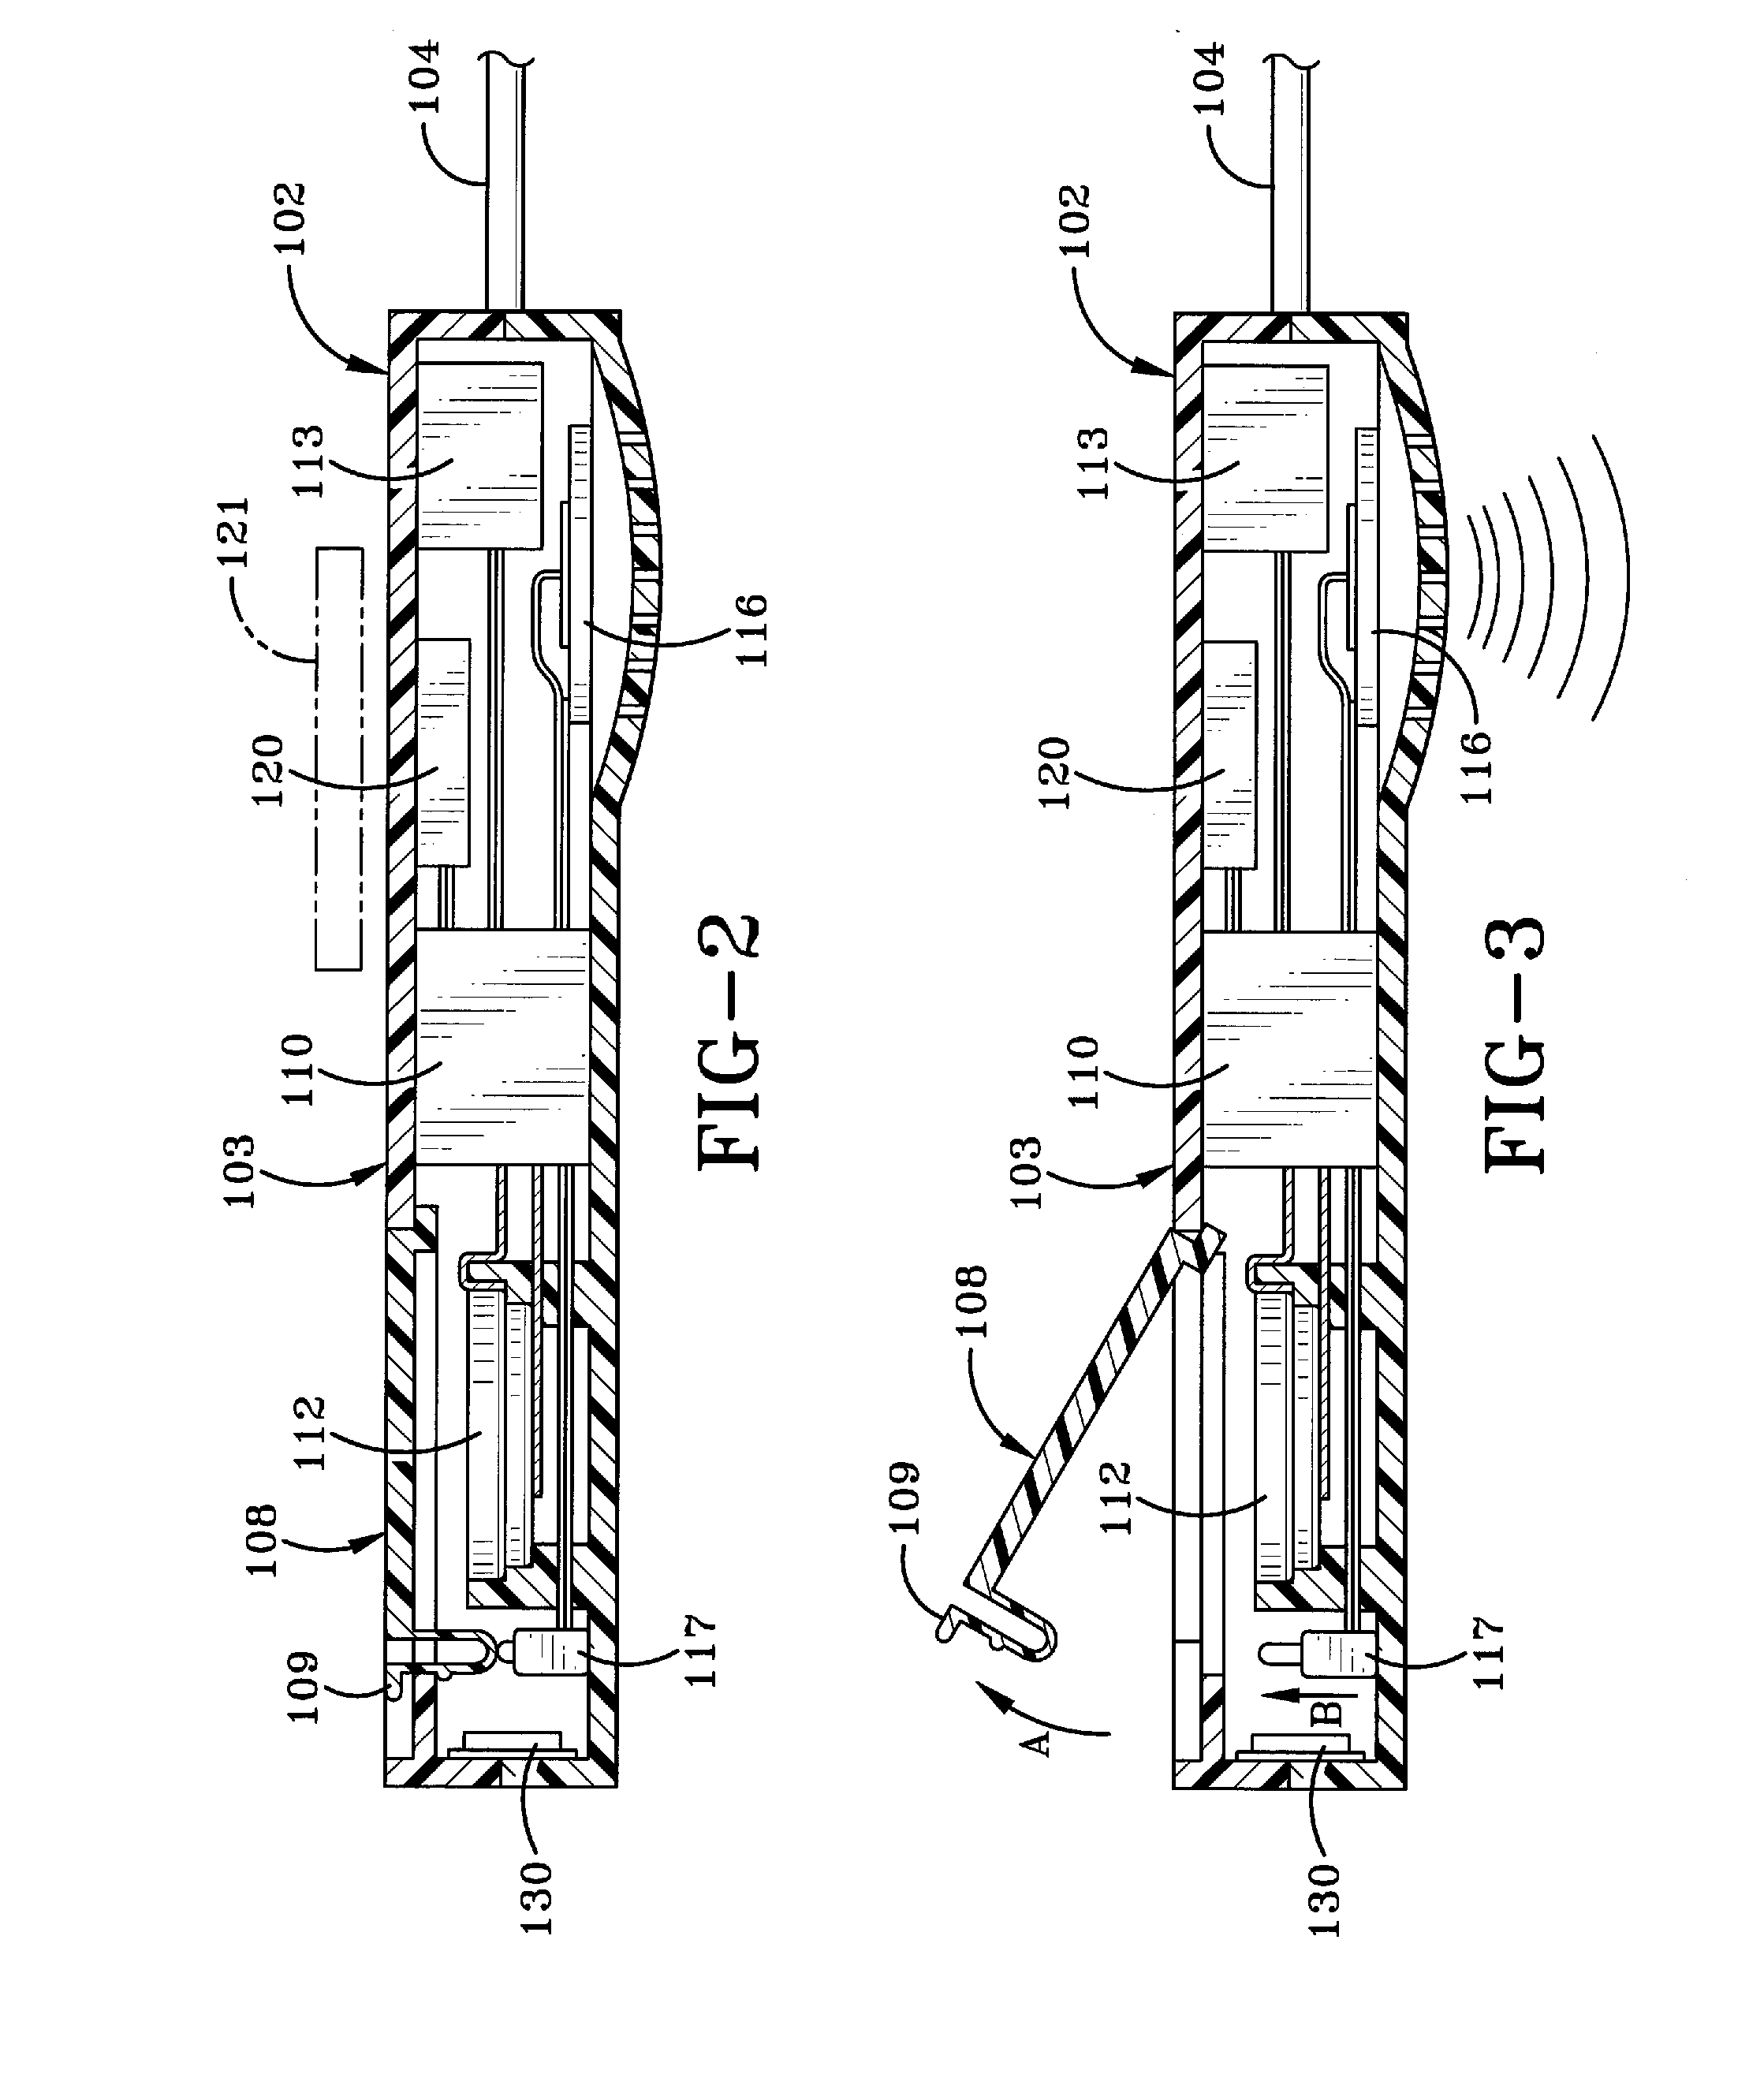 Method and apparatus for powering a security device